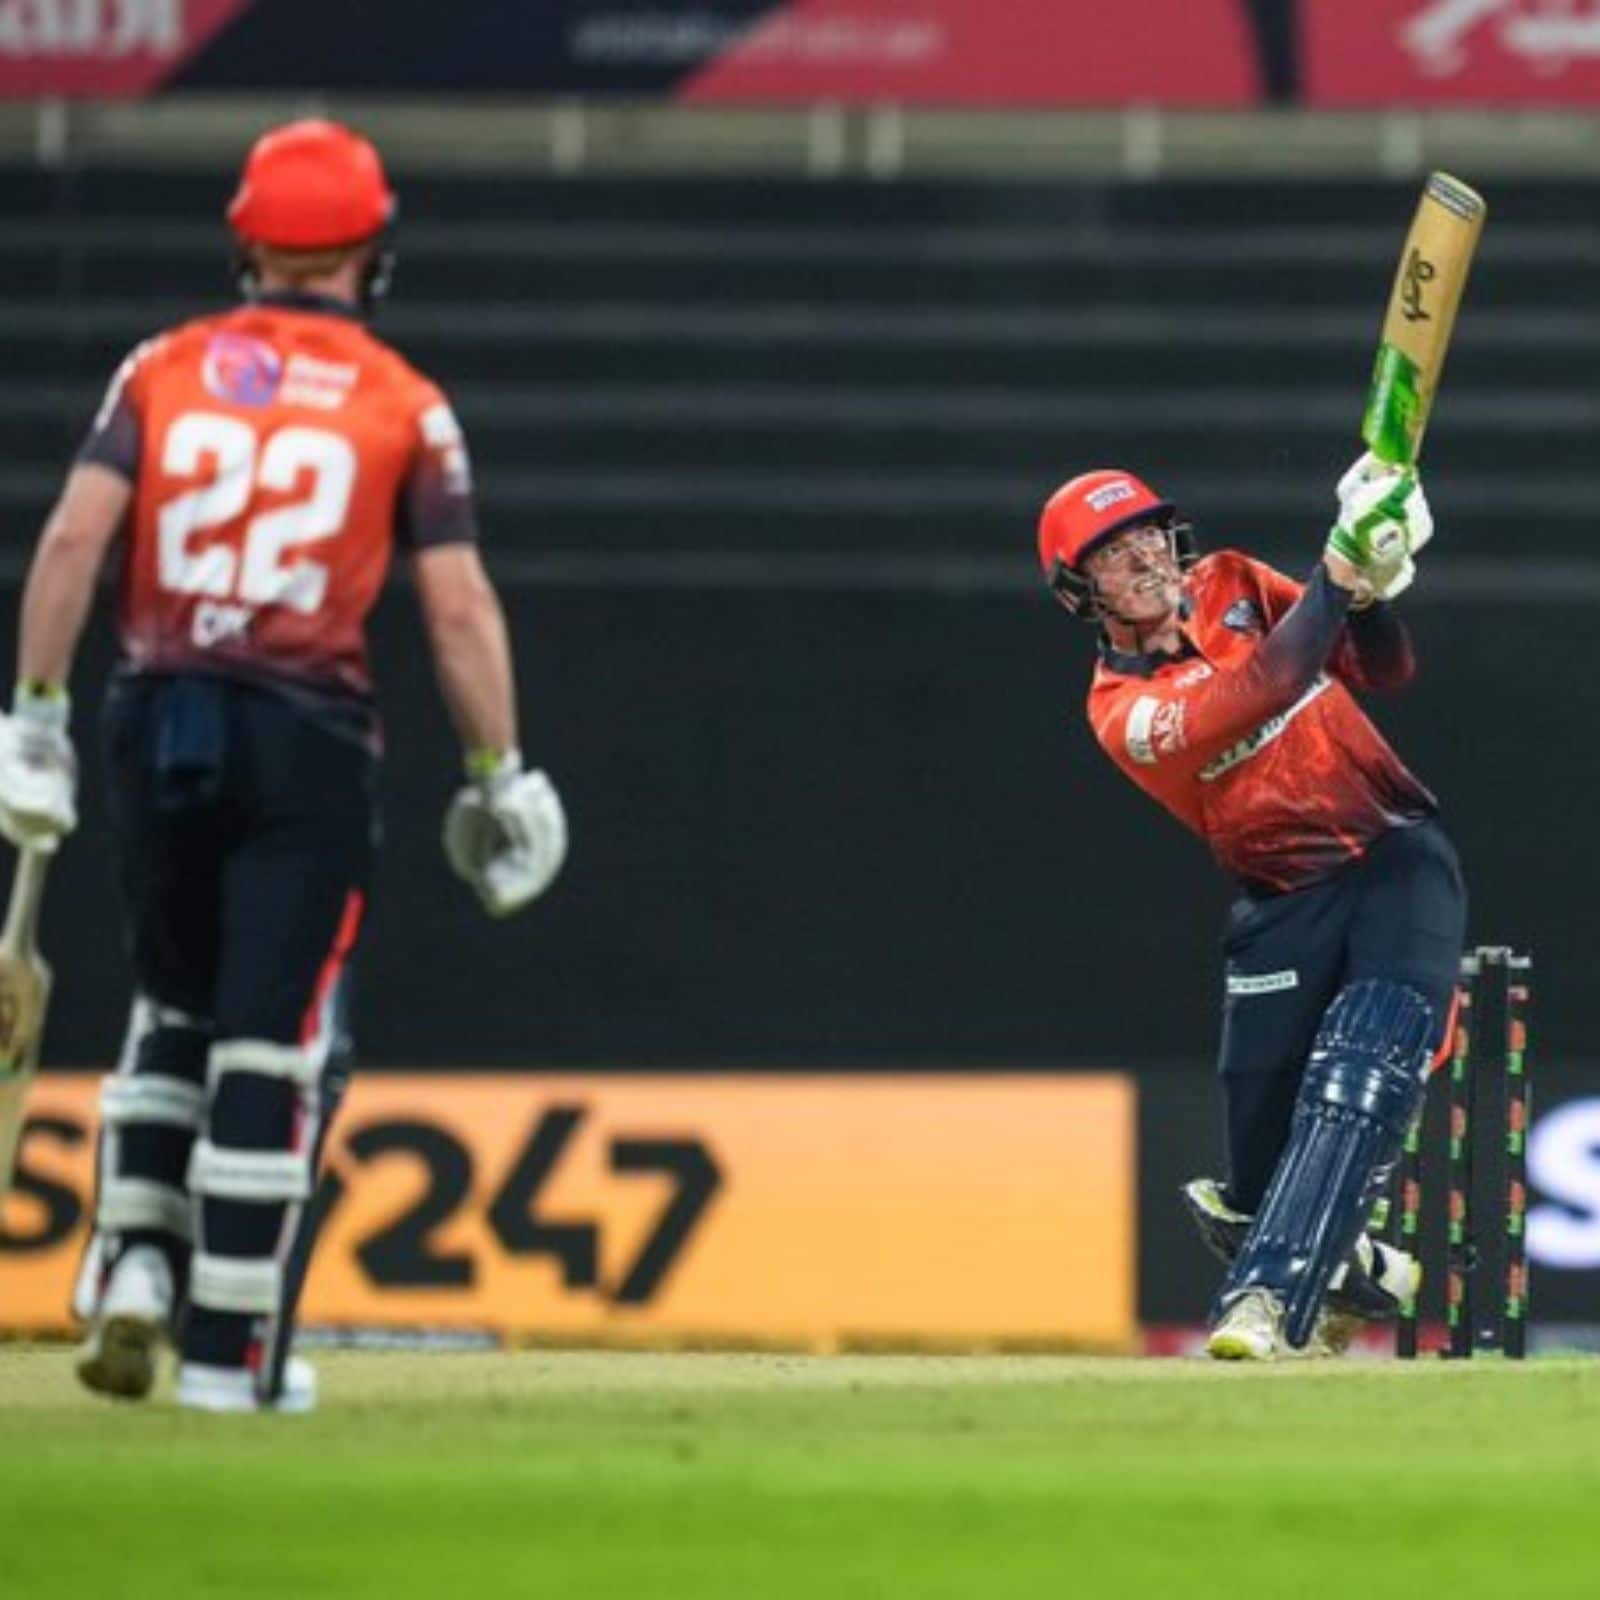 Abu Dhabi T10 League 2022 Morrisville Samp Army vs Delhi Bulls Live Streaming When and Where to Watch Match Live Coverage on TV and Online